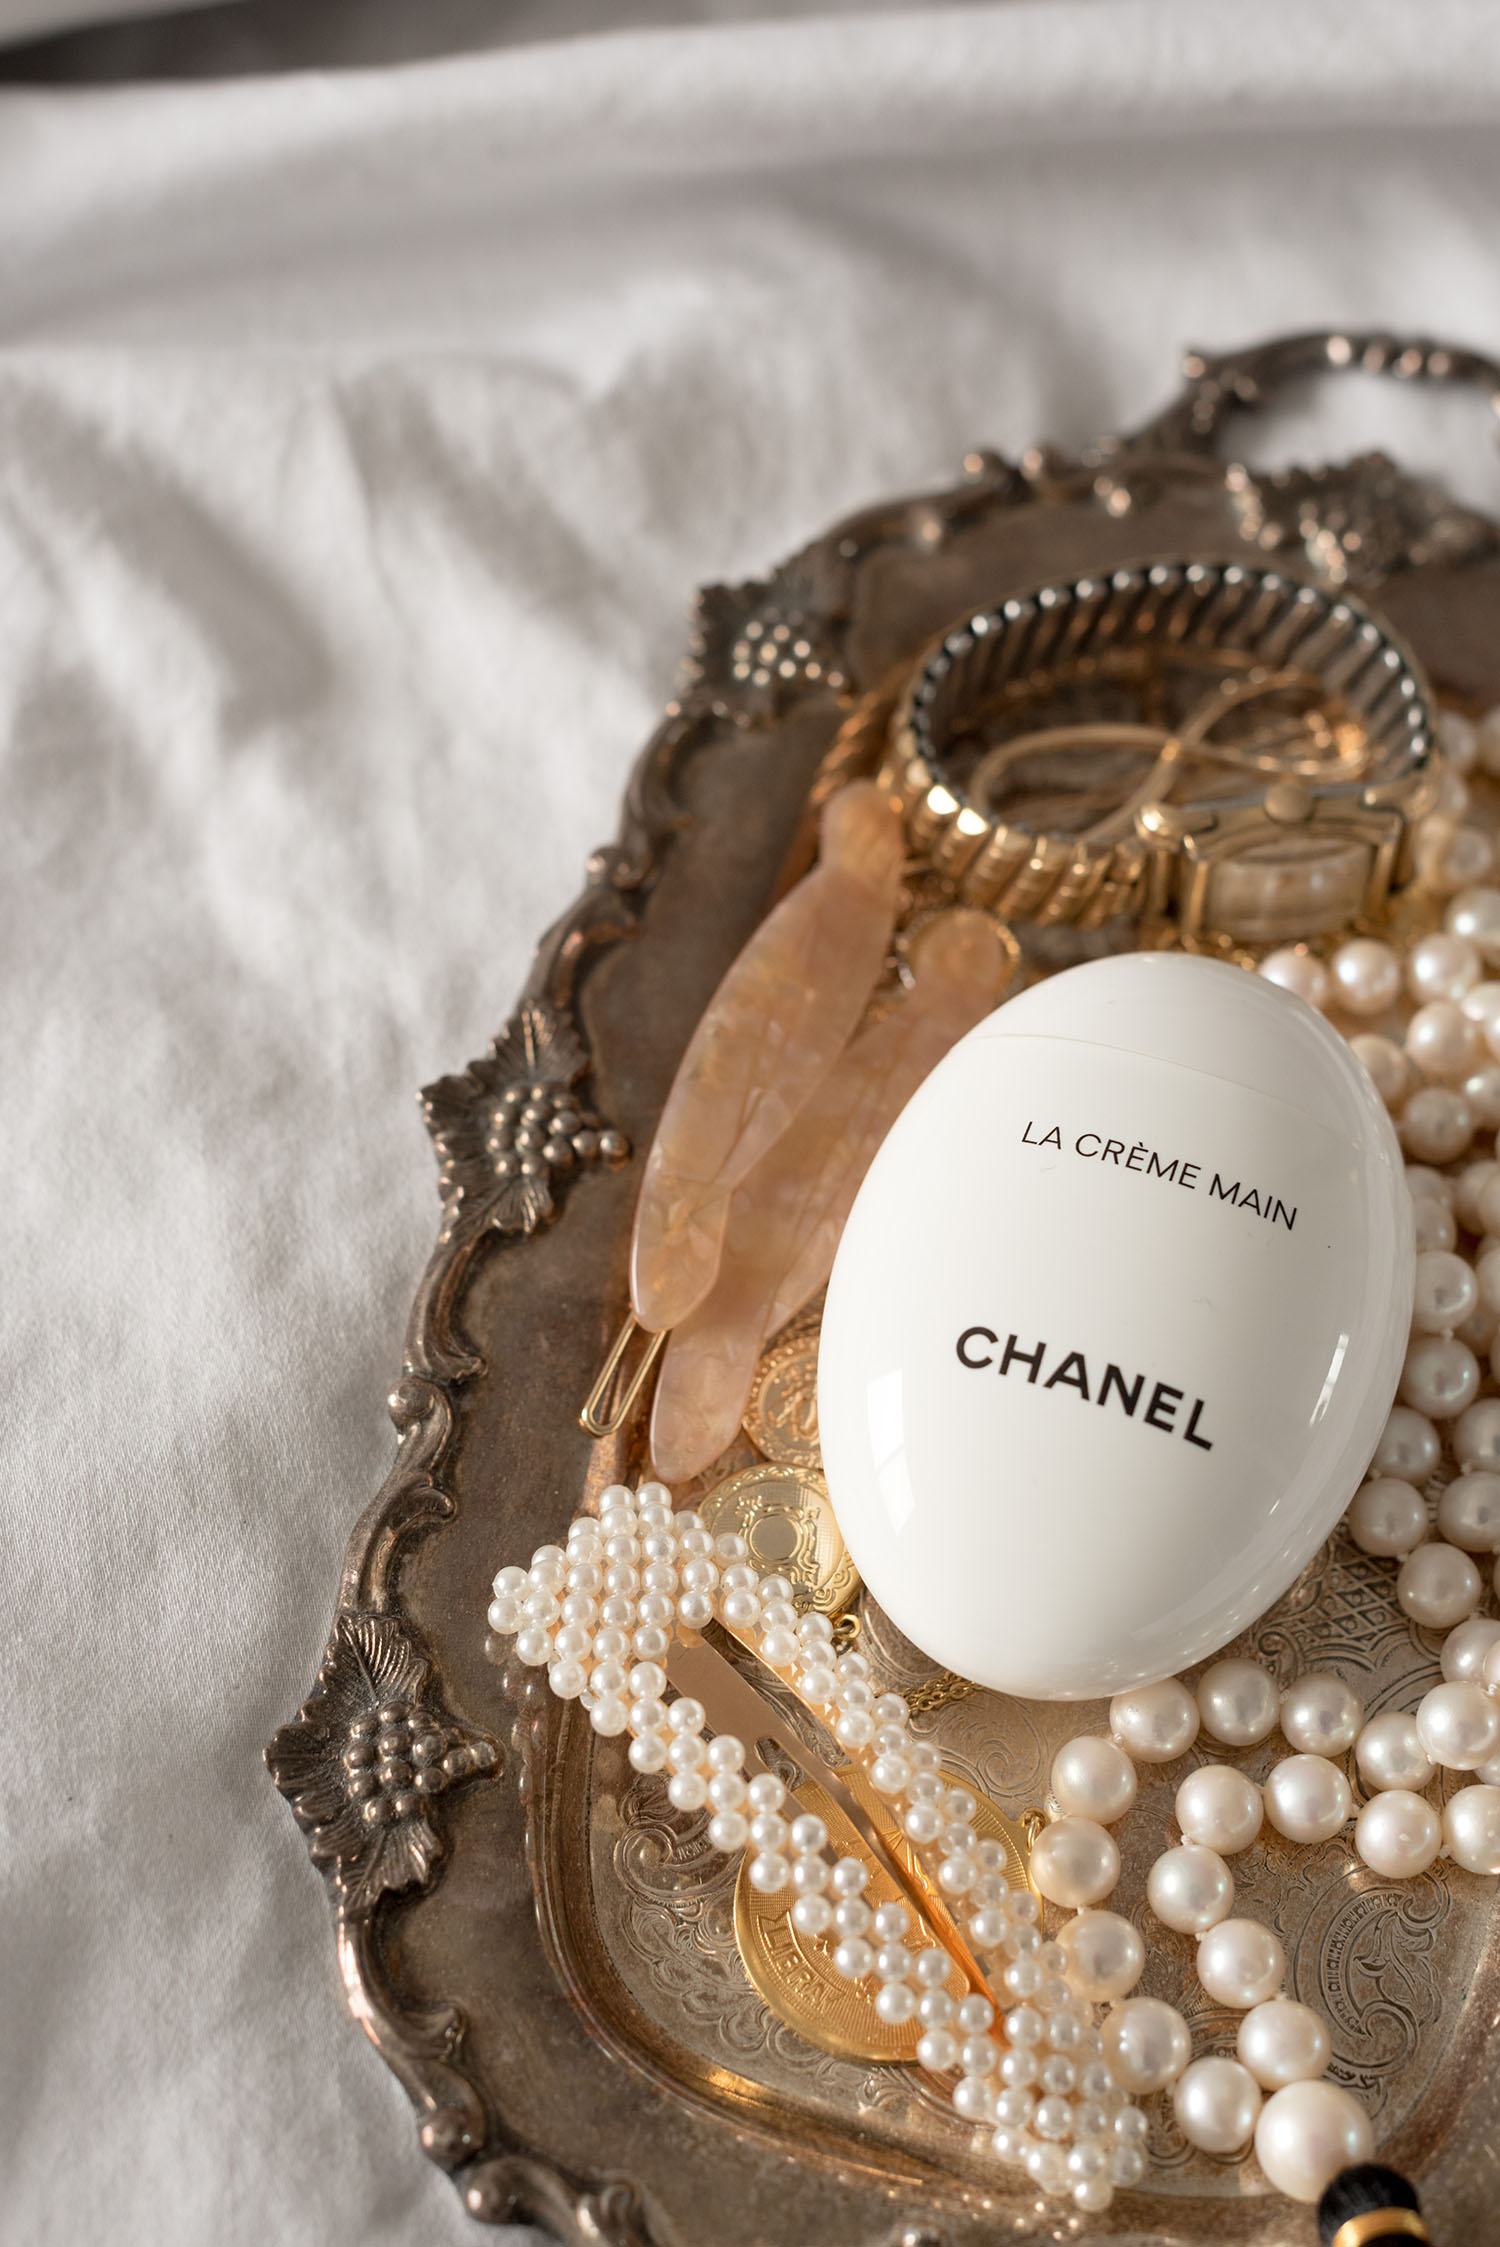 Chanel Beauty creme de main, along with pearl accessories, on a silver tray, as captured by top Canadian beauty blogger Cee Fardoe of Coco & Vera